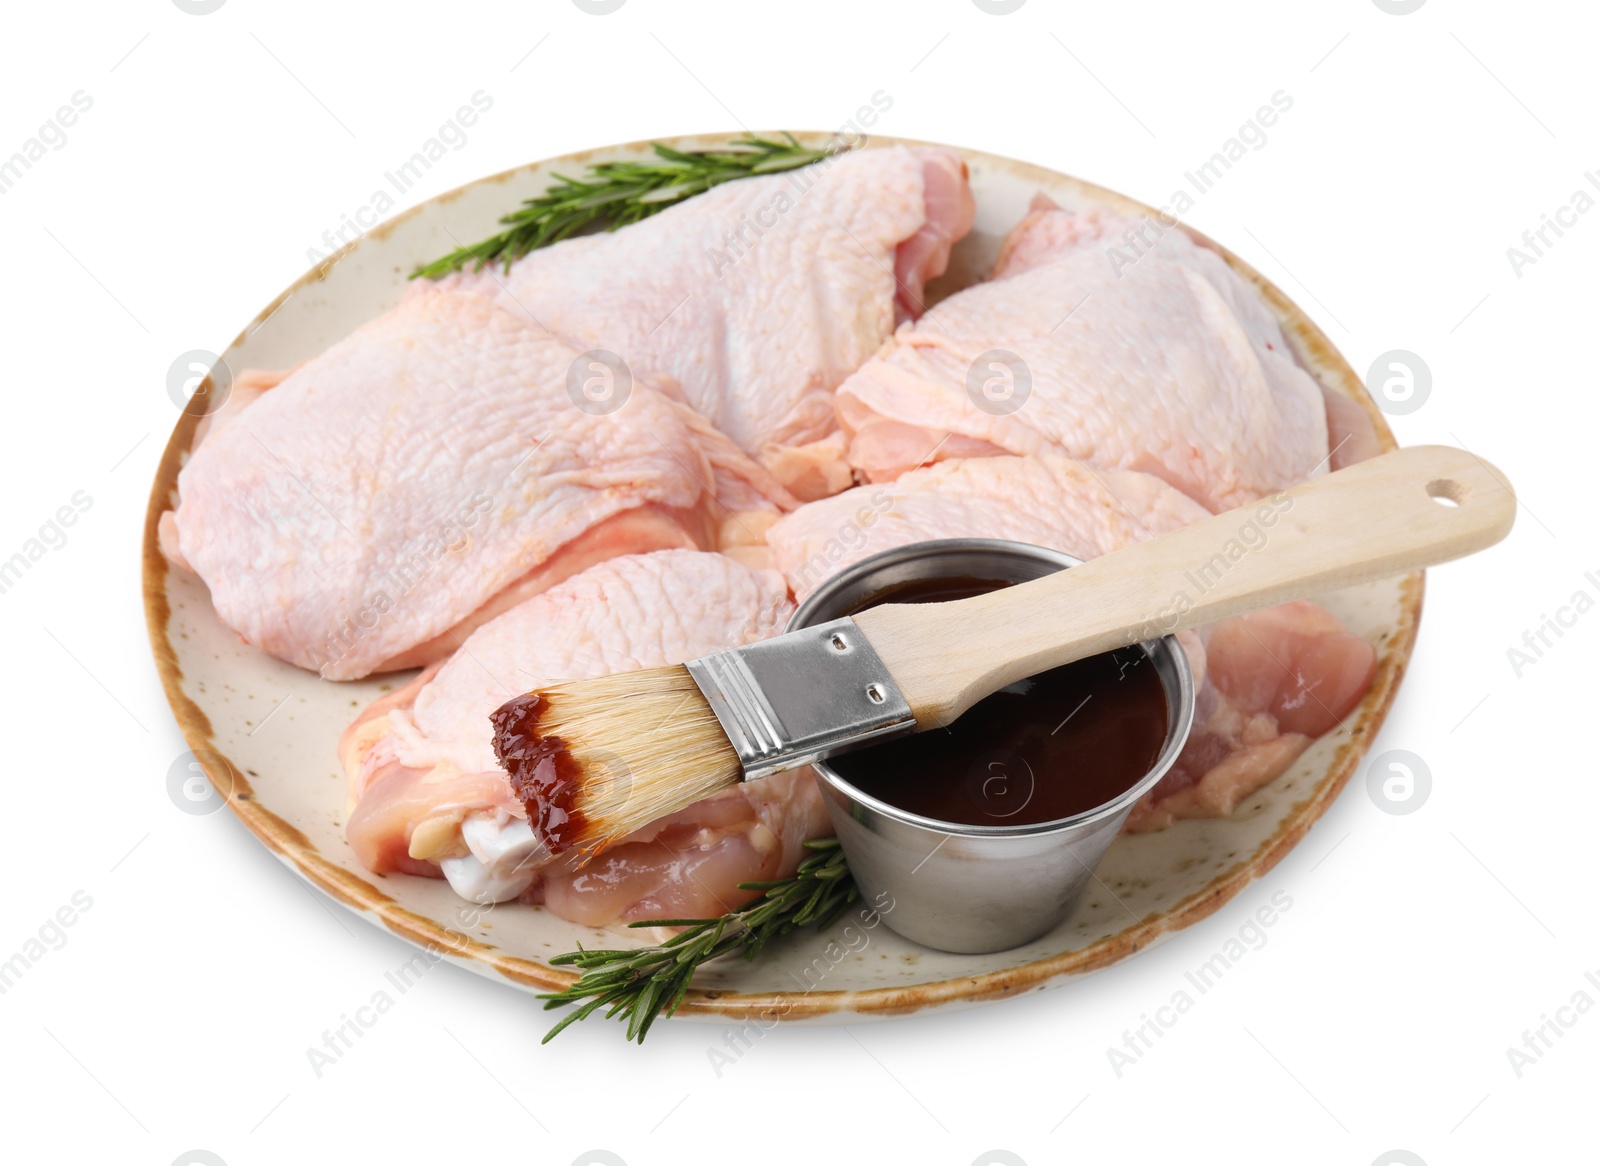 Photo of Plate with marinade, basting brush, raw chicken and rosemary isolated on white